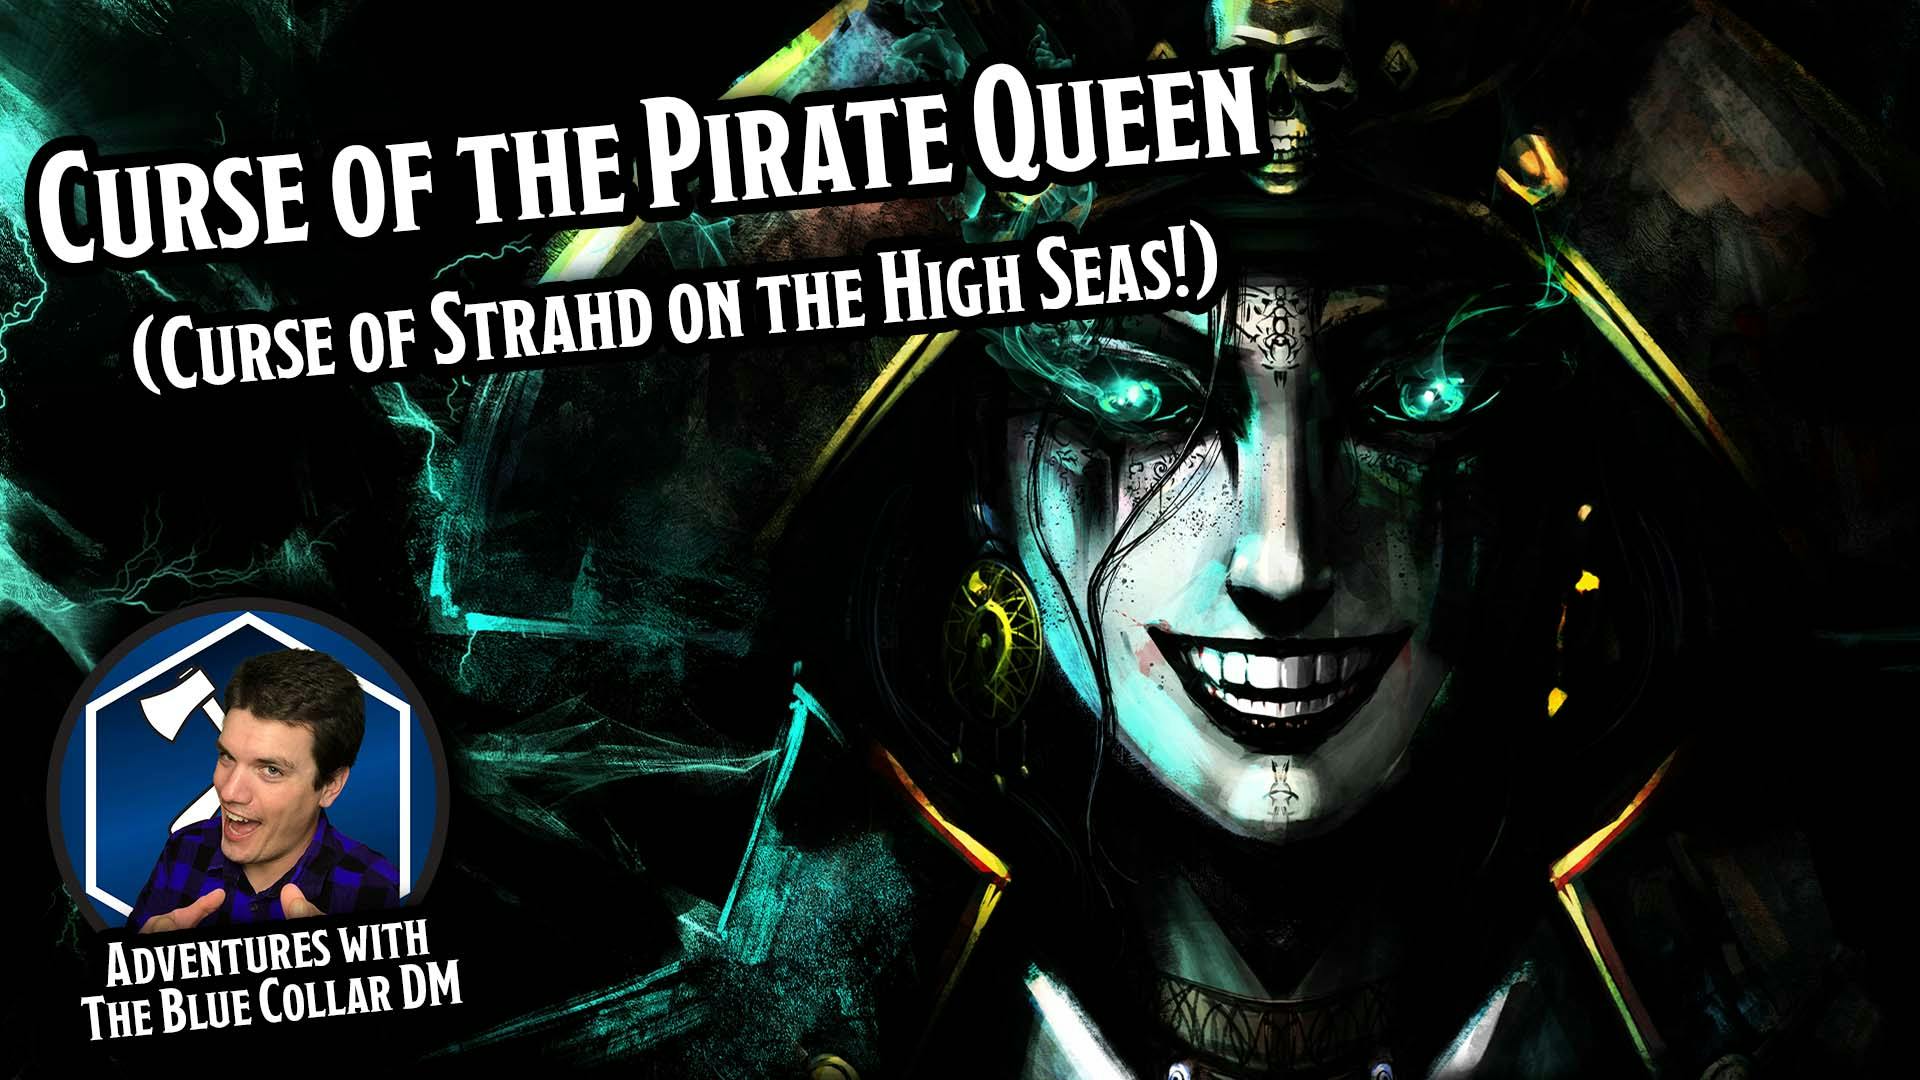 Curse of the Pirate Queen (Curse of Strahd with a Nautical Twist!)